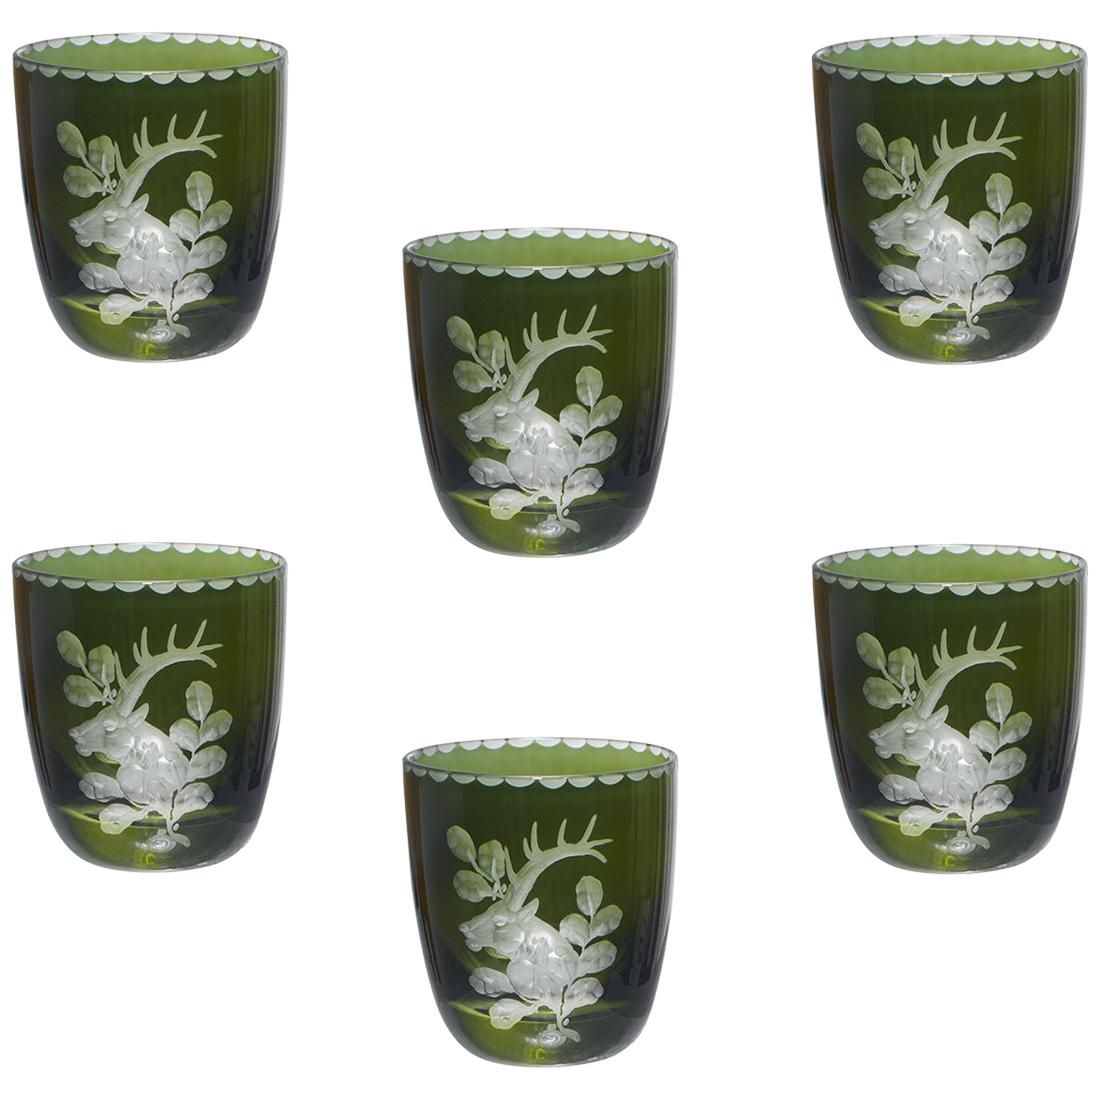 Set of Six Schnapps Glasses Green with Hunting Decor Sofina Boutique Kitzbuehel